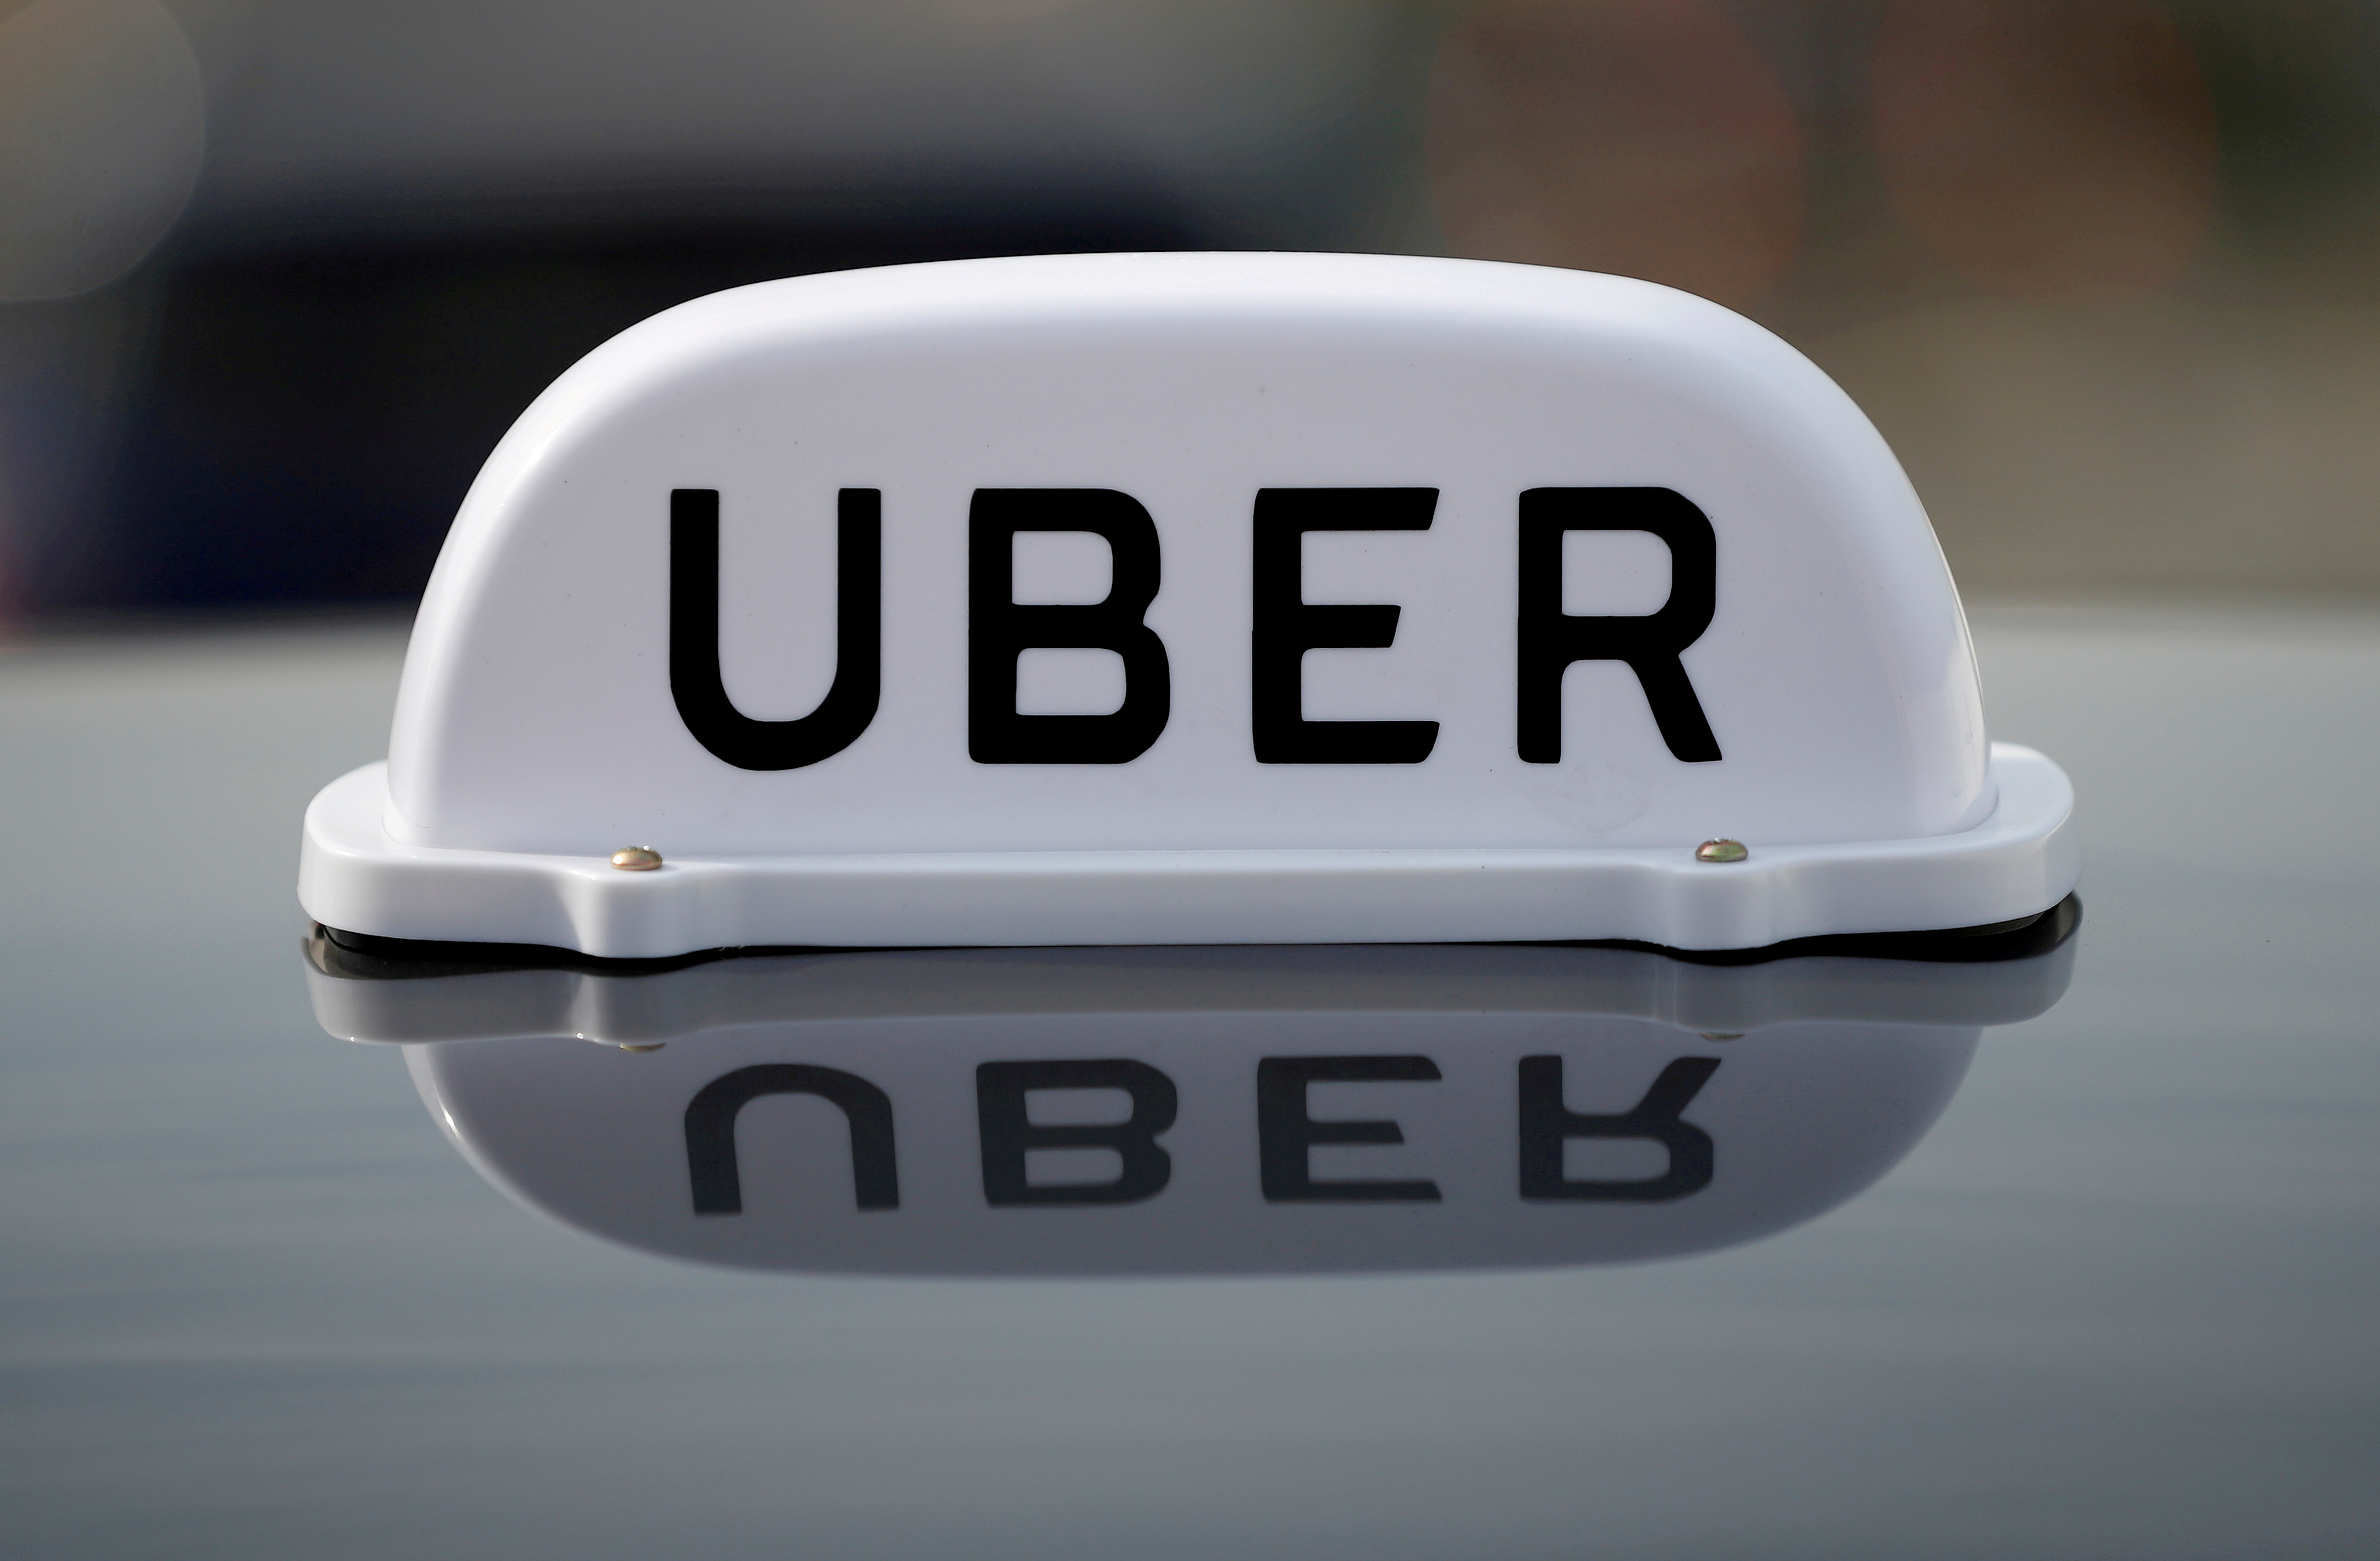 The Logo of taxi company Uber is seen on the roof of a private hire taxi in Liverpool